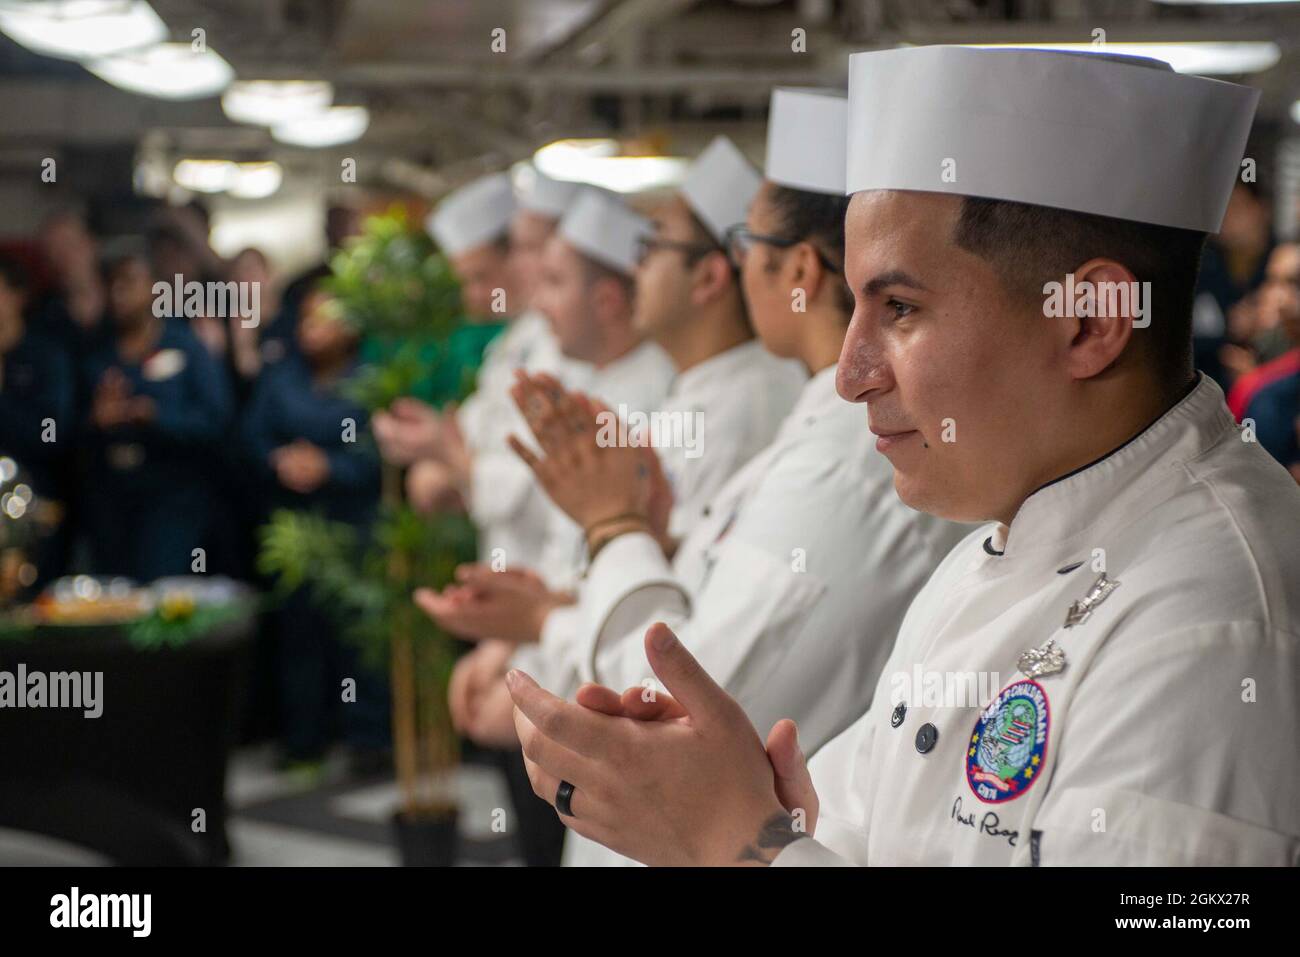 210714-N-CW176-1066 GULF OF ADEN (July 14, 2021) – Sailors participating in a cook-off event applaud on the forward mess decks of aircraft carrier USS Ronald Reagan (CVN 76) in the Gulf of Aden, July 14. Culinary specialists from different galleys around the ship came together to demonstrate their culinary skills in a head-to-head contest judged by members of the ship’s crew. Ronald Reagan is deployed to the U.S. 5th Fleet area of operations in support of naval operations to ensure maritime stability and security in the Central Region, connecting the Mediterranean and Pacific through the weste Stock Photo